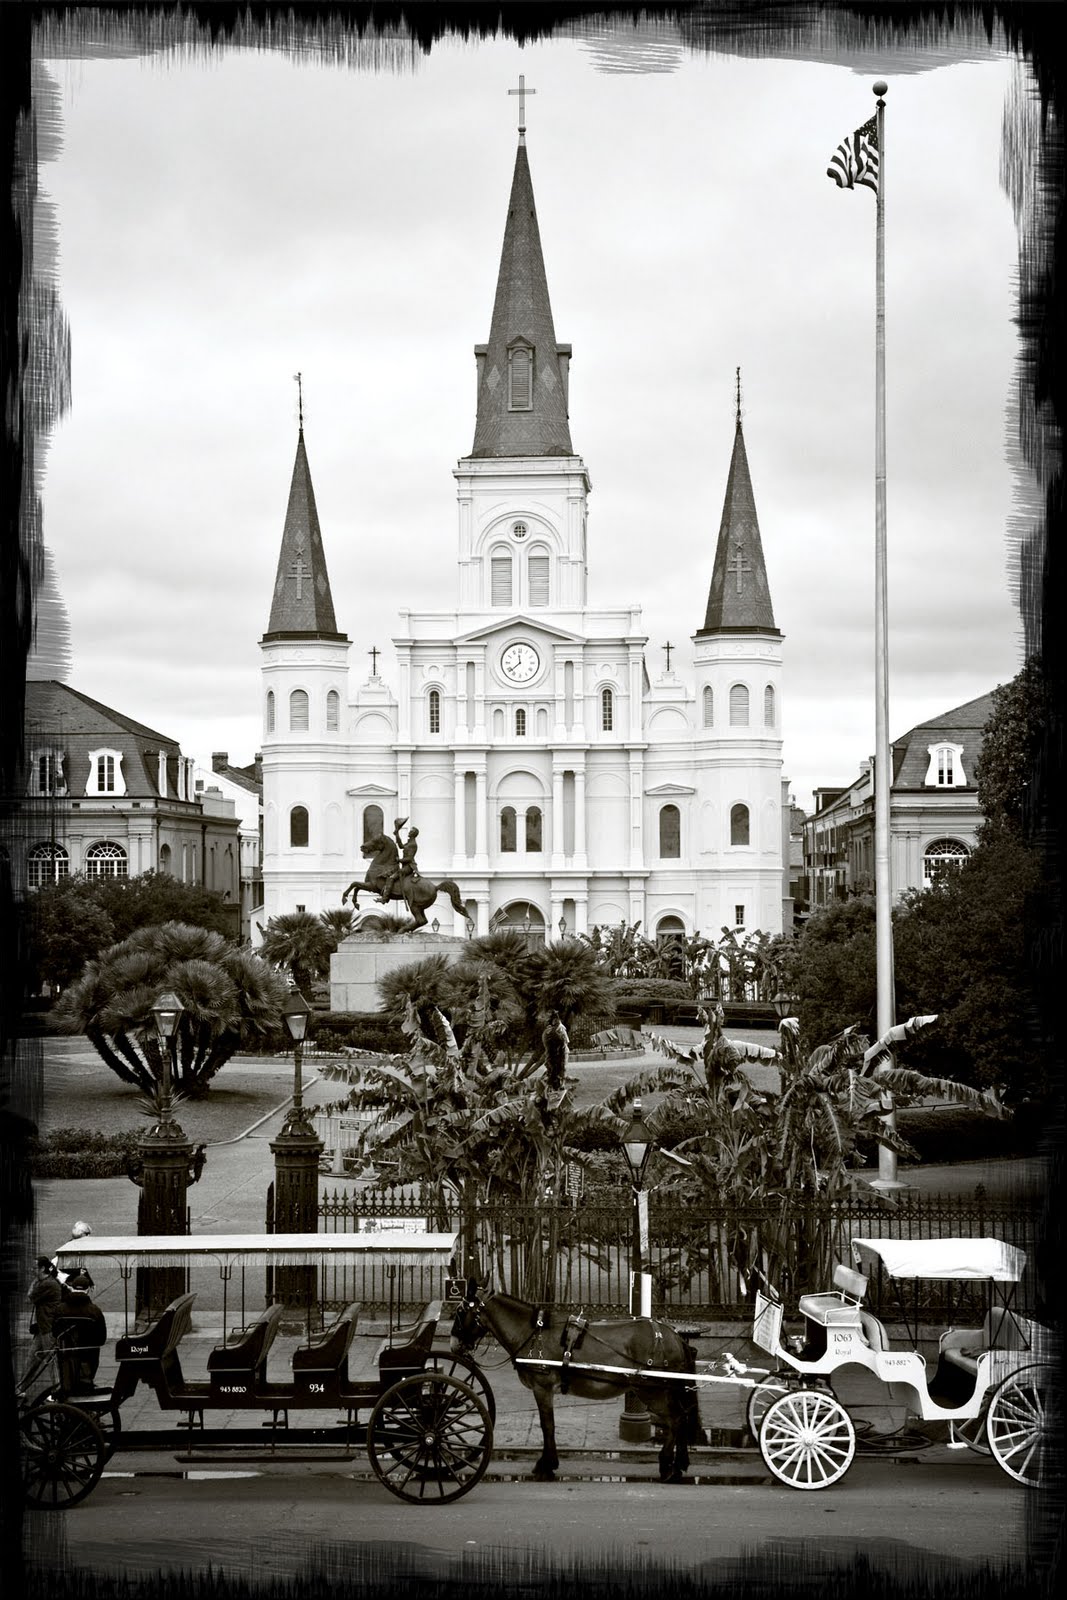 Our Travel Blog: New Orleans - French Quarter